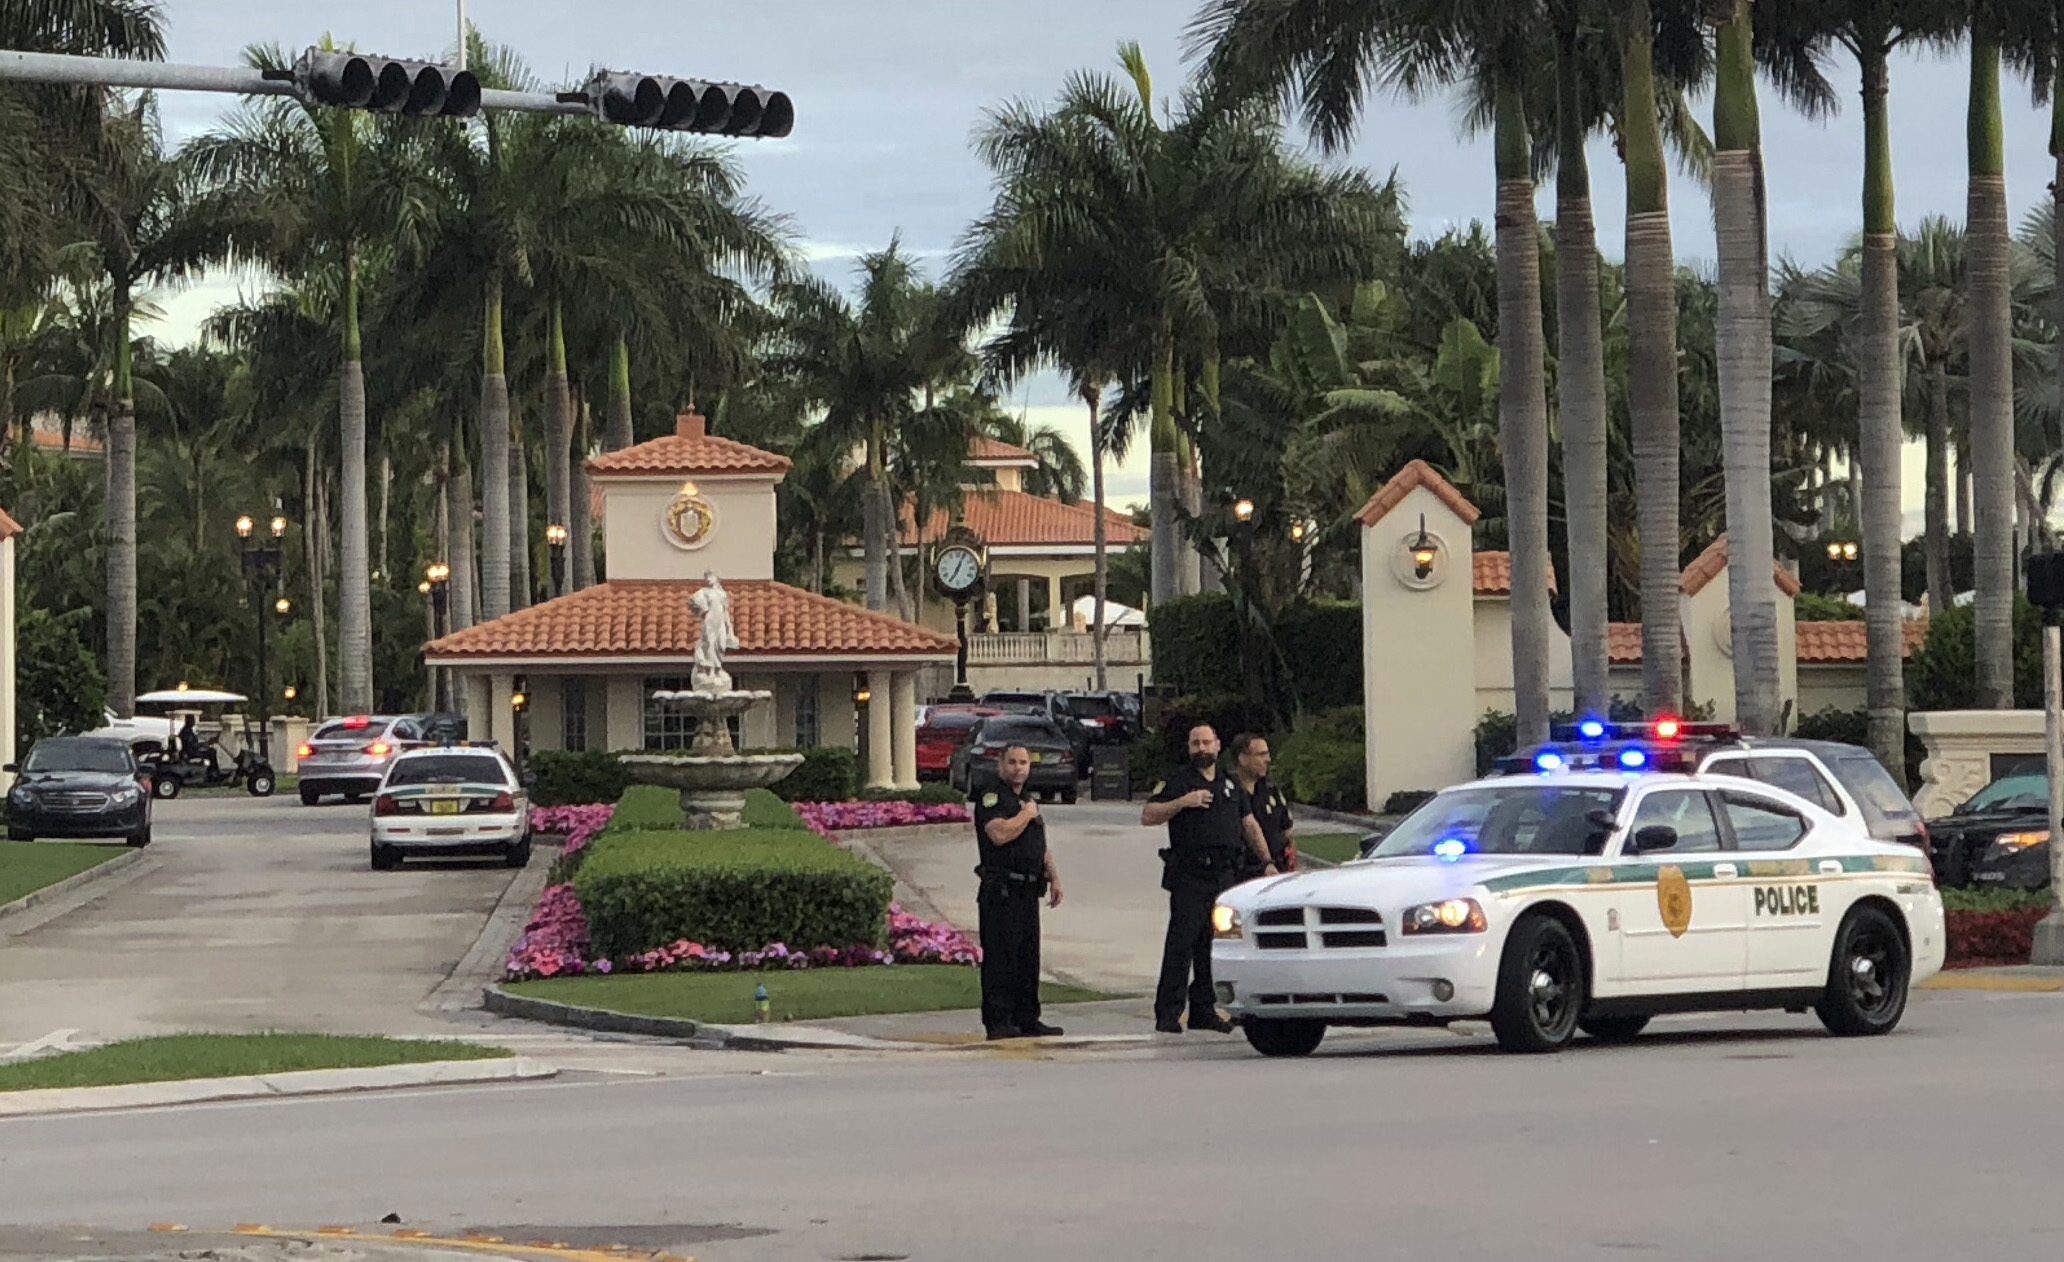 PHOTO: Police respond to The Trump National Doral resort after reports of a shooting inside the resort, May 18, 2018 in Doral, Fla.